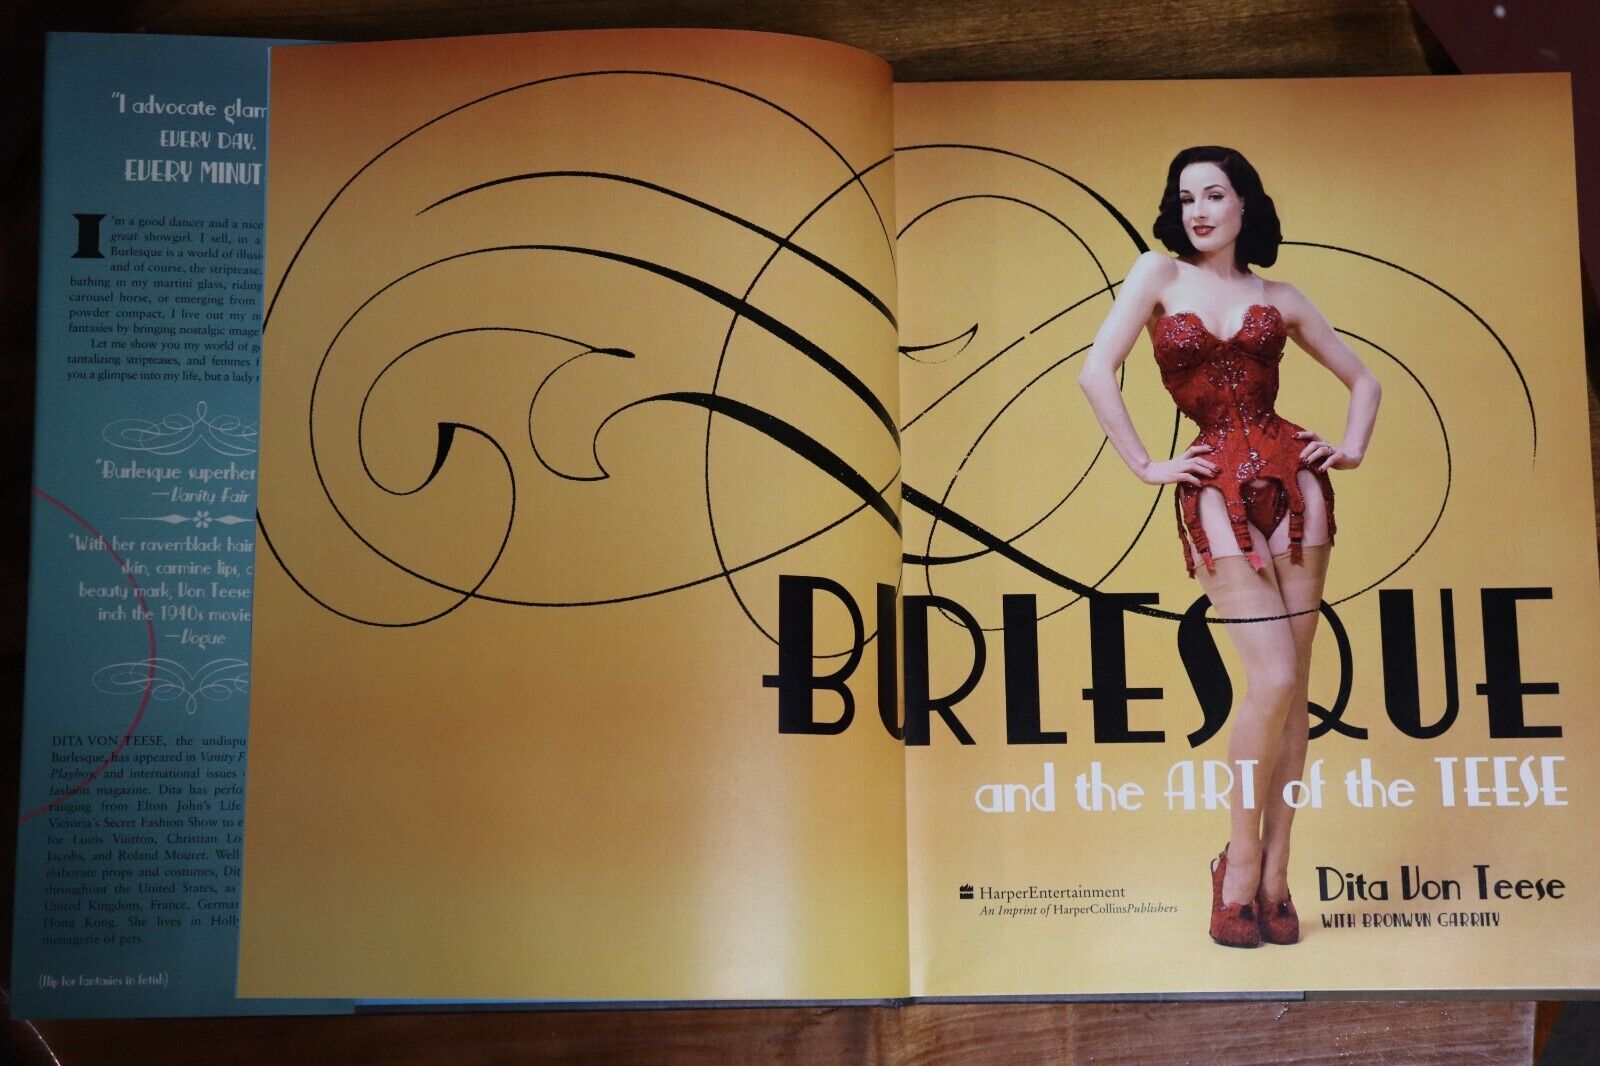 Burlesque Fetish & The Art Of The Teese - 2006 - Pop Culture Hardcover Book